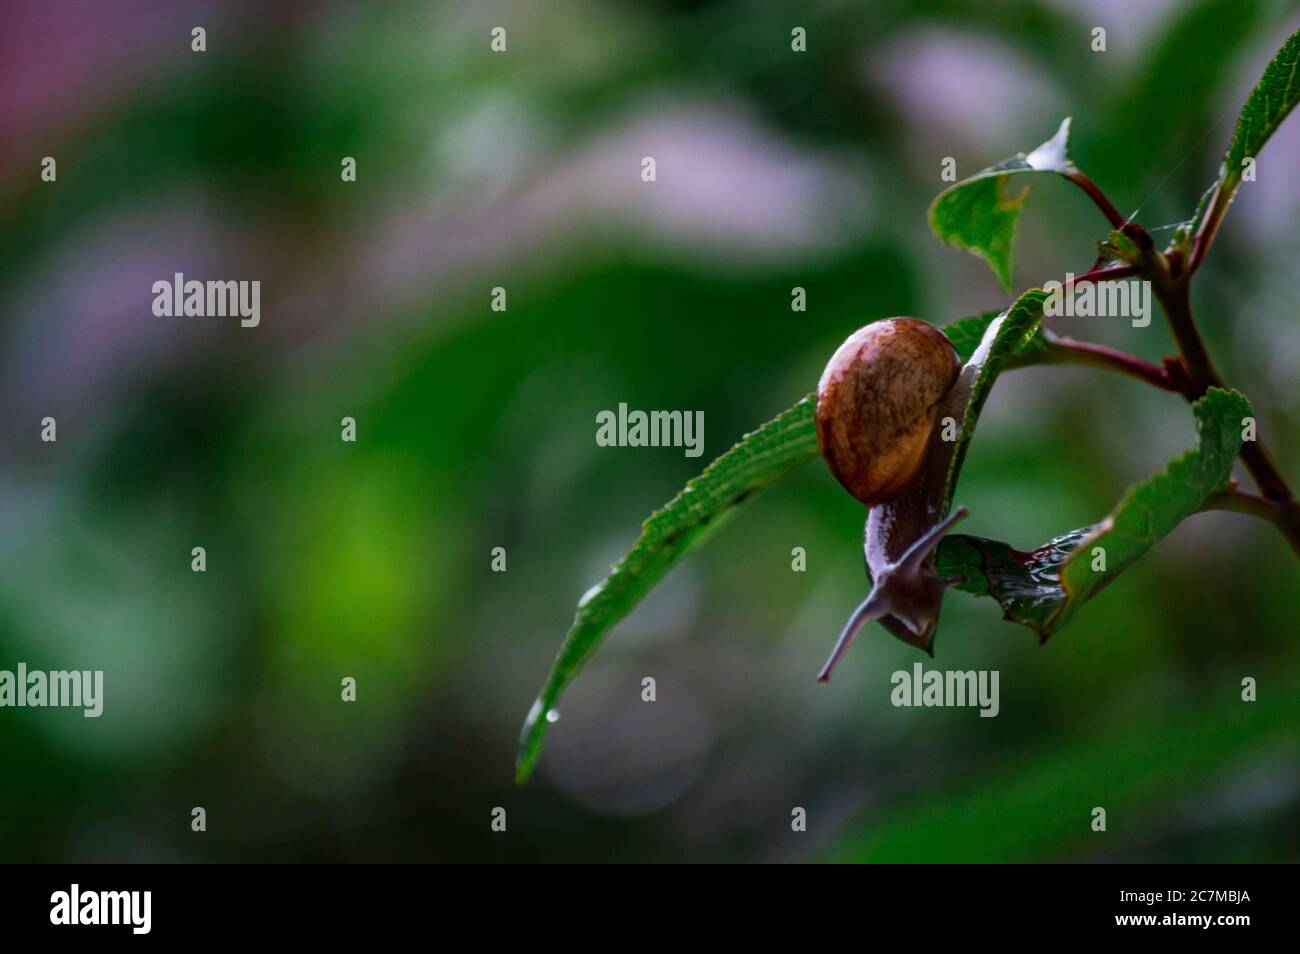 Close-up of a land snail after summer rain sitting on a leaf Stock Photo